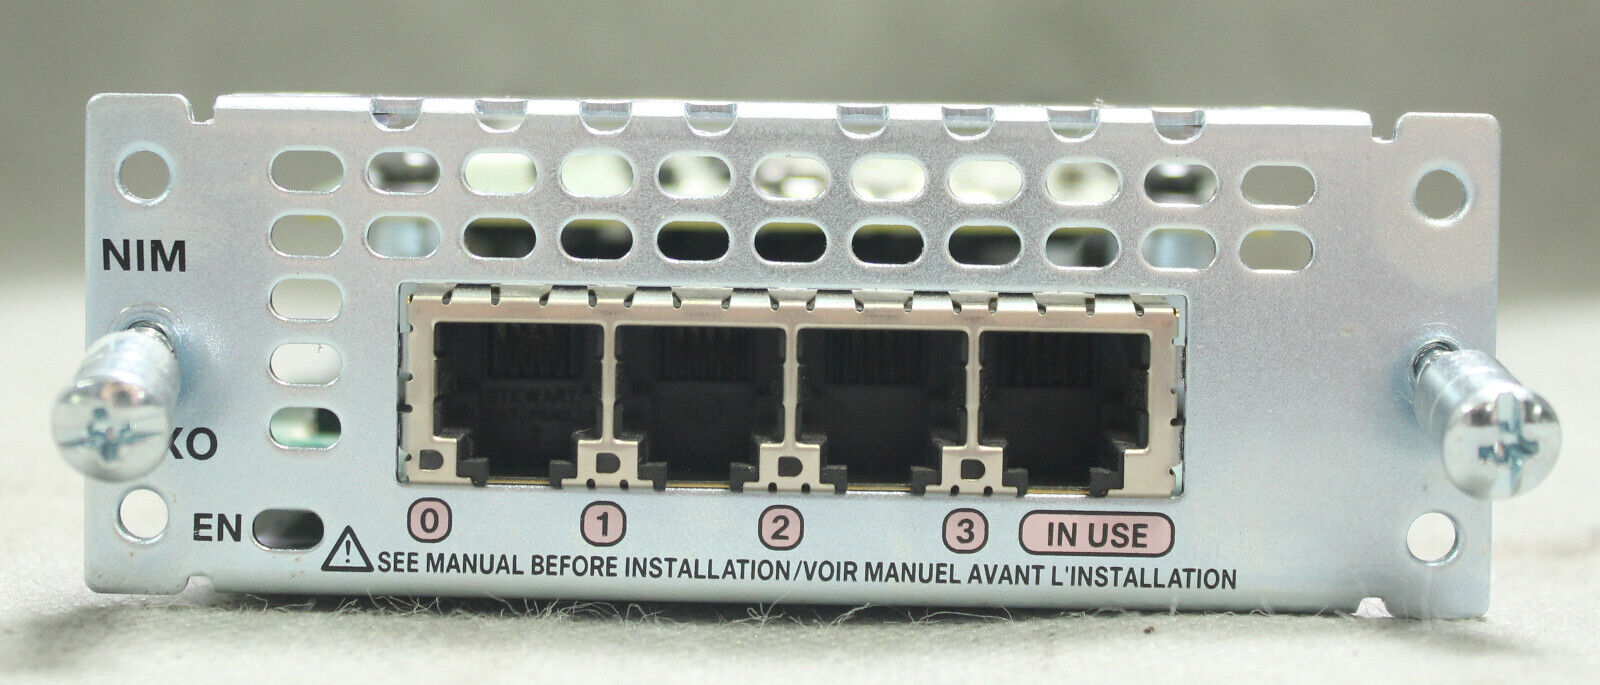 Cisco NIM-4FXO 4-port Network Interface Module - FXO for ISR 4000 Series Routers